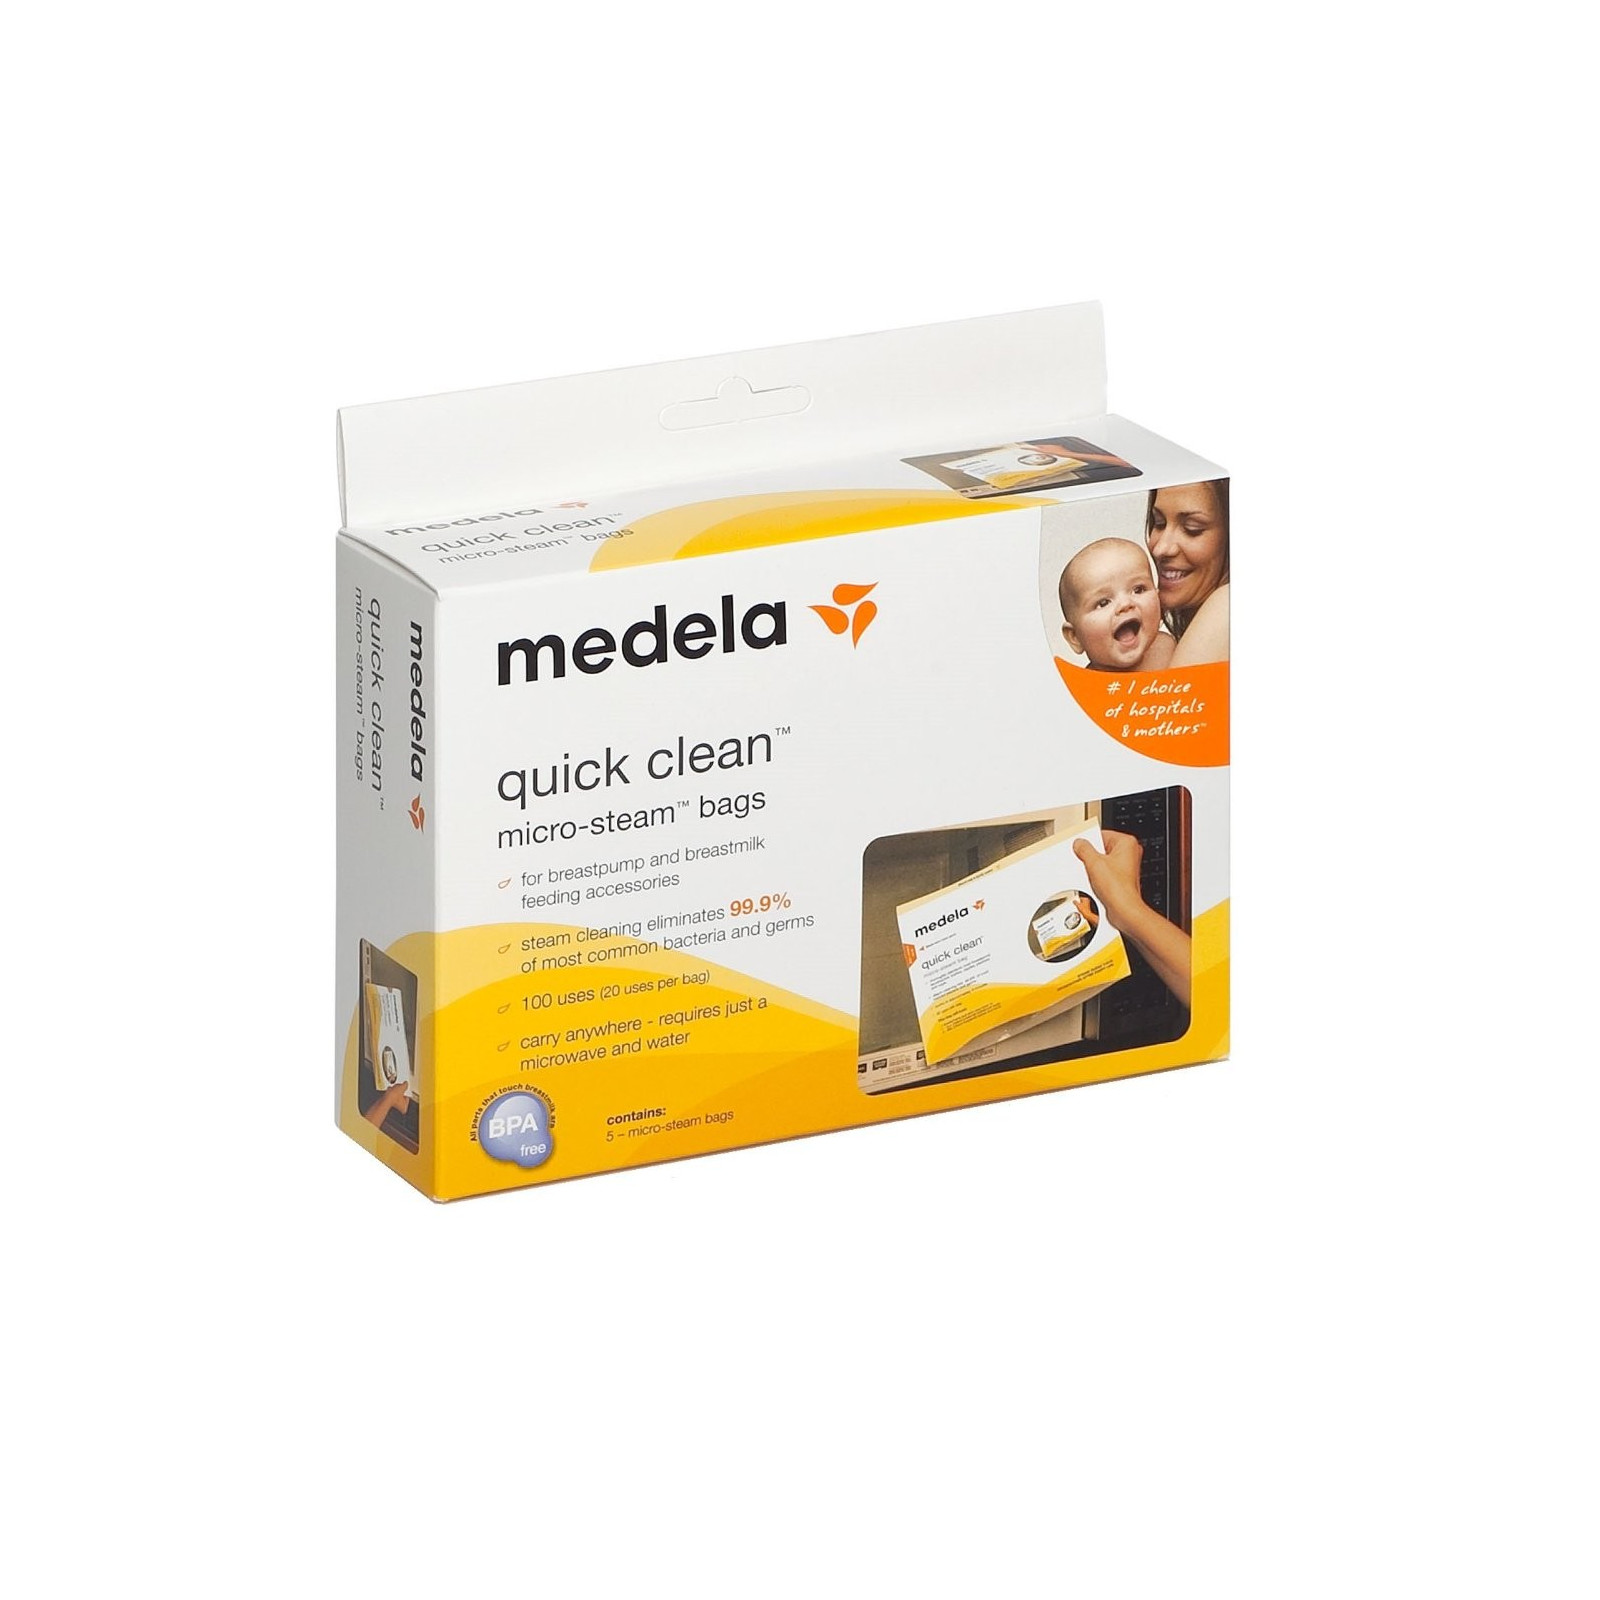 Medela Quick Clean Breast Pump and Accessories Wipes 24count - For Moms